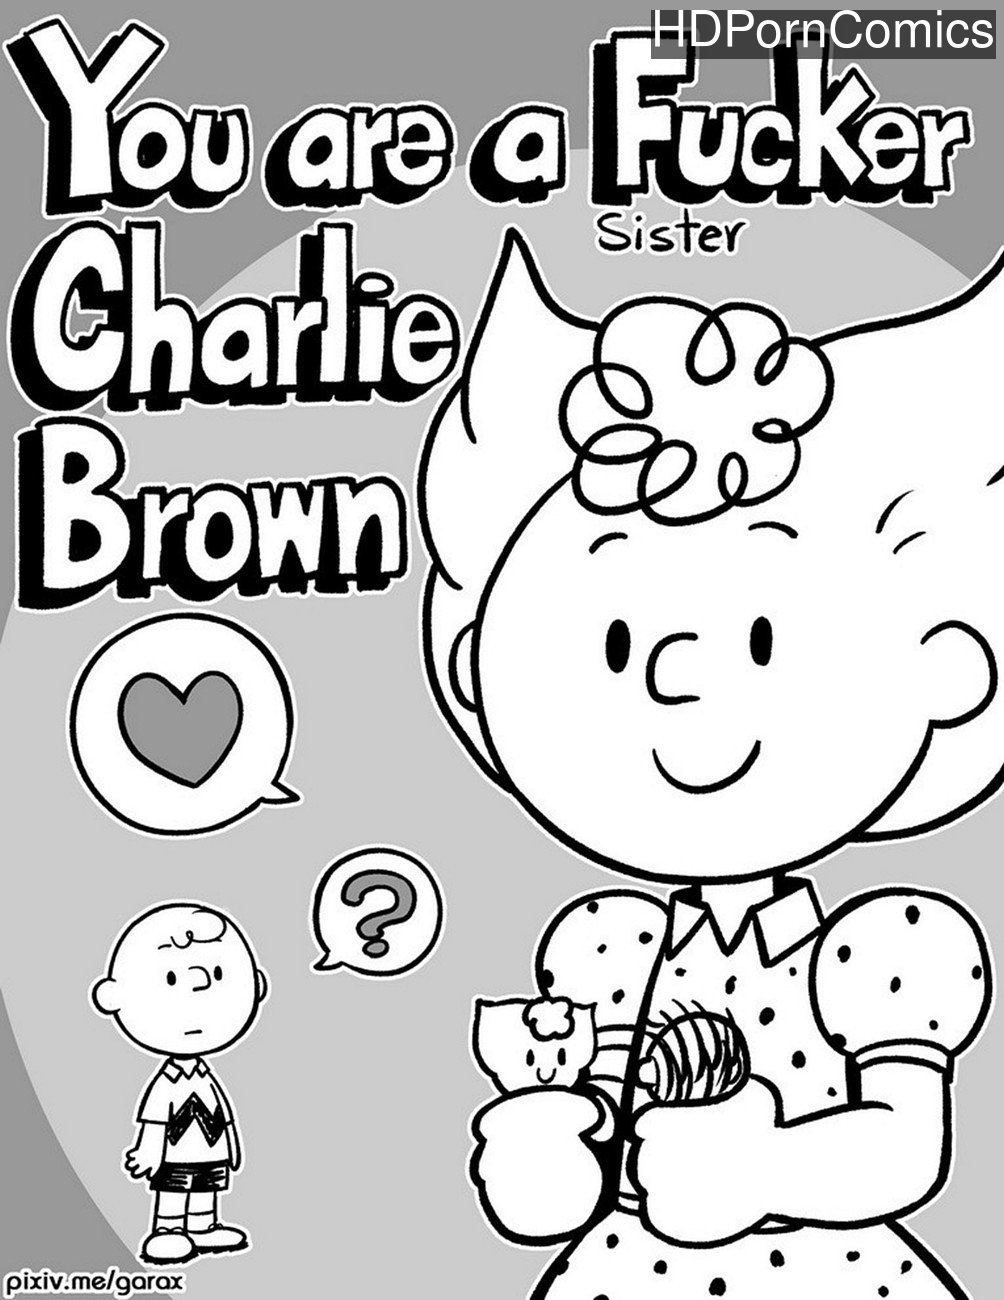 Adult Charlie Brown Porn - You Are A Sister Fucker Charlie Brown 1 comic porn | HD Porn Comics